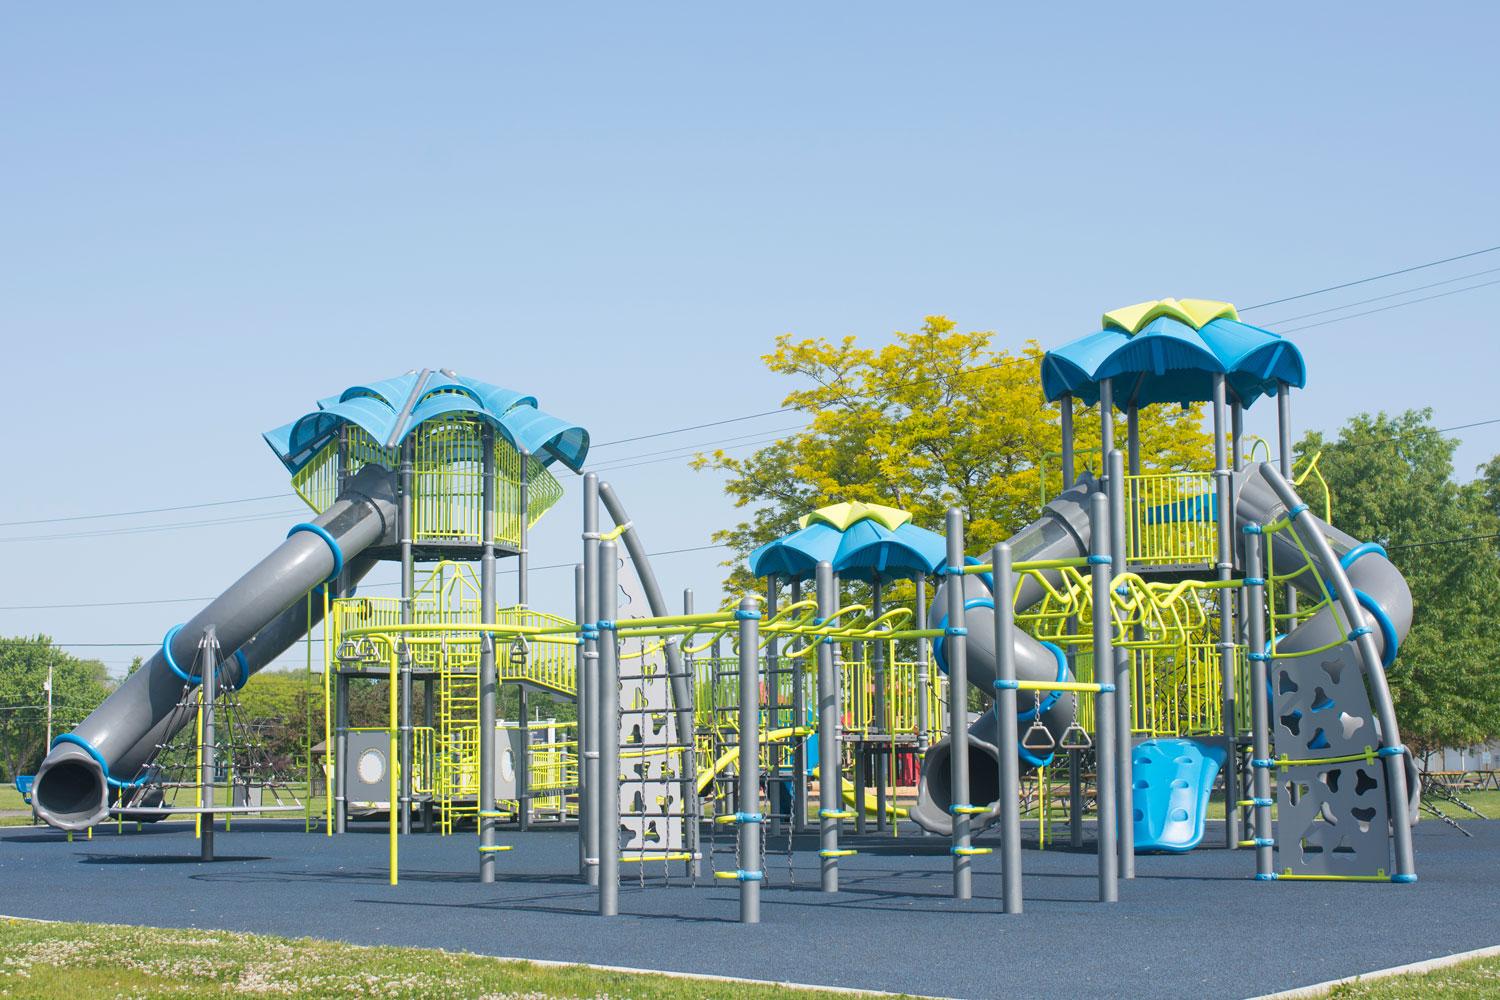 A tall playground structure with grey tube slides.